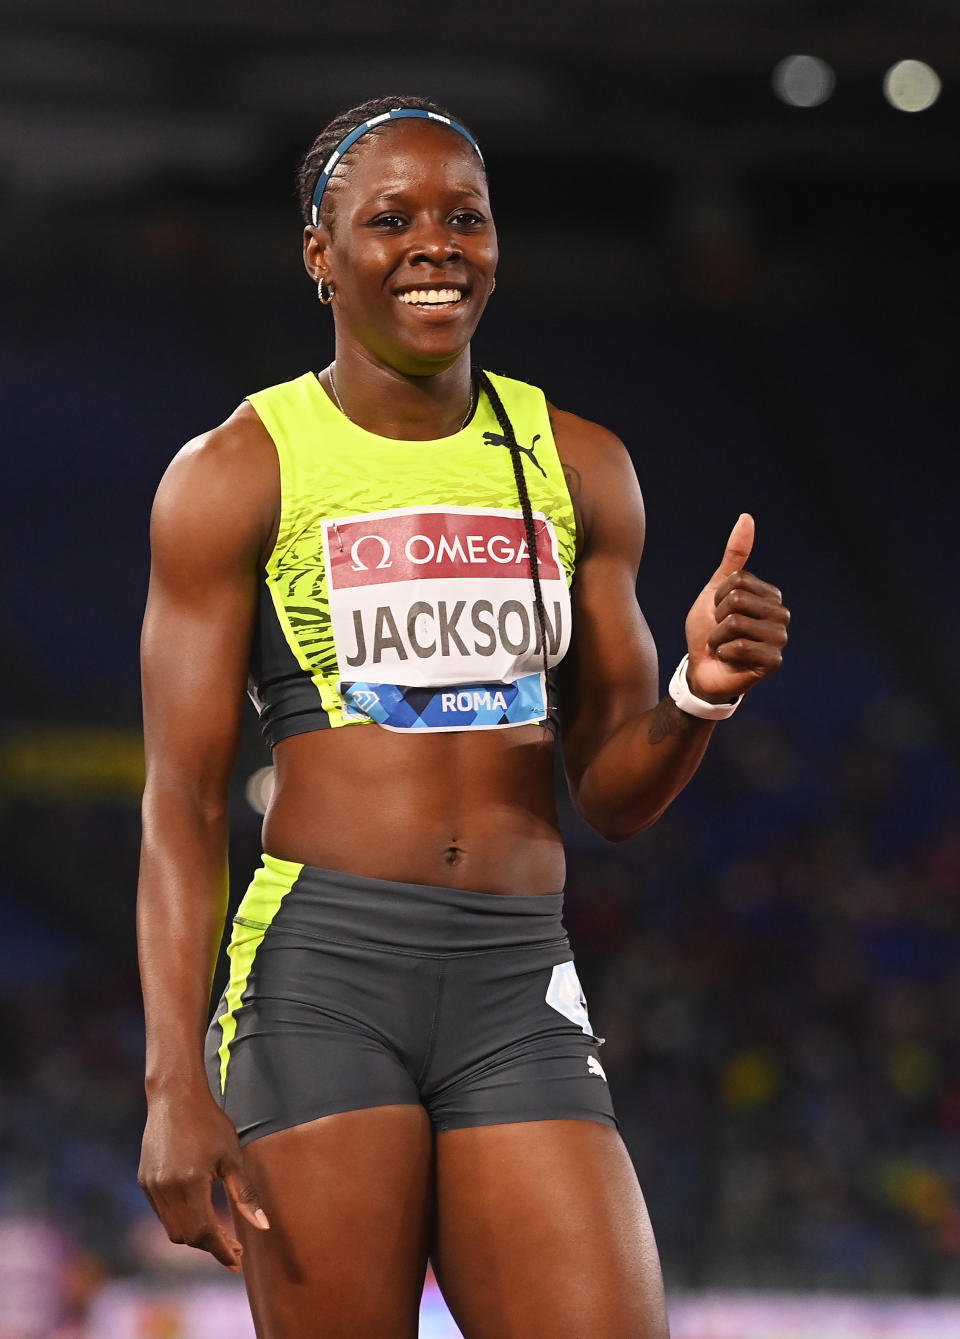 Shericka Jackson of Jamaica celebrates after winning the Women’s 200m during the Golden Gala Pietro Mennea 2022, part of the 2022 Diamond League series at Stadio Olimpico on June 09, 2022 in Rome, Italy. - Credit: Tullio M. Puglia/Getty Images